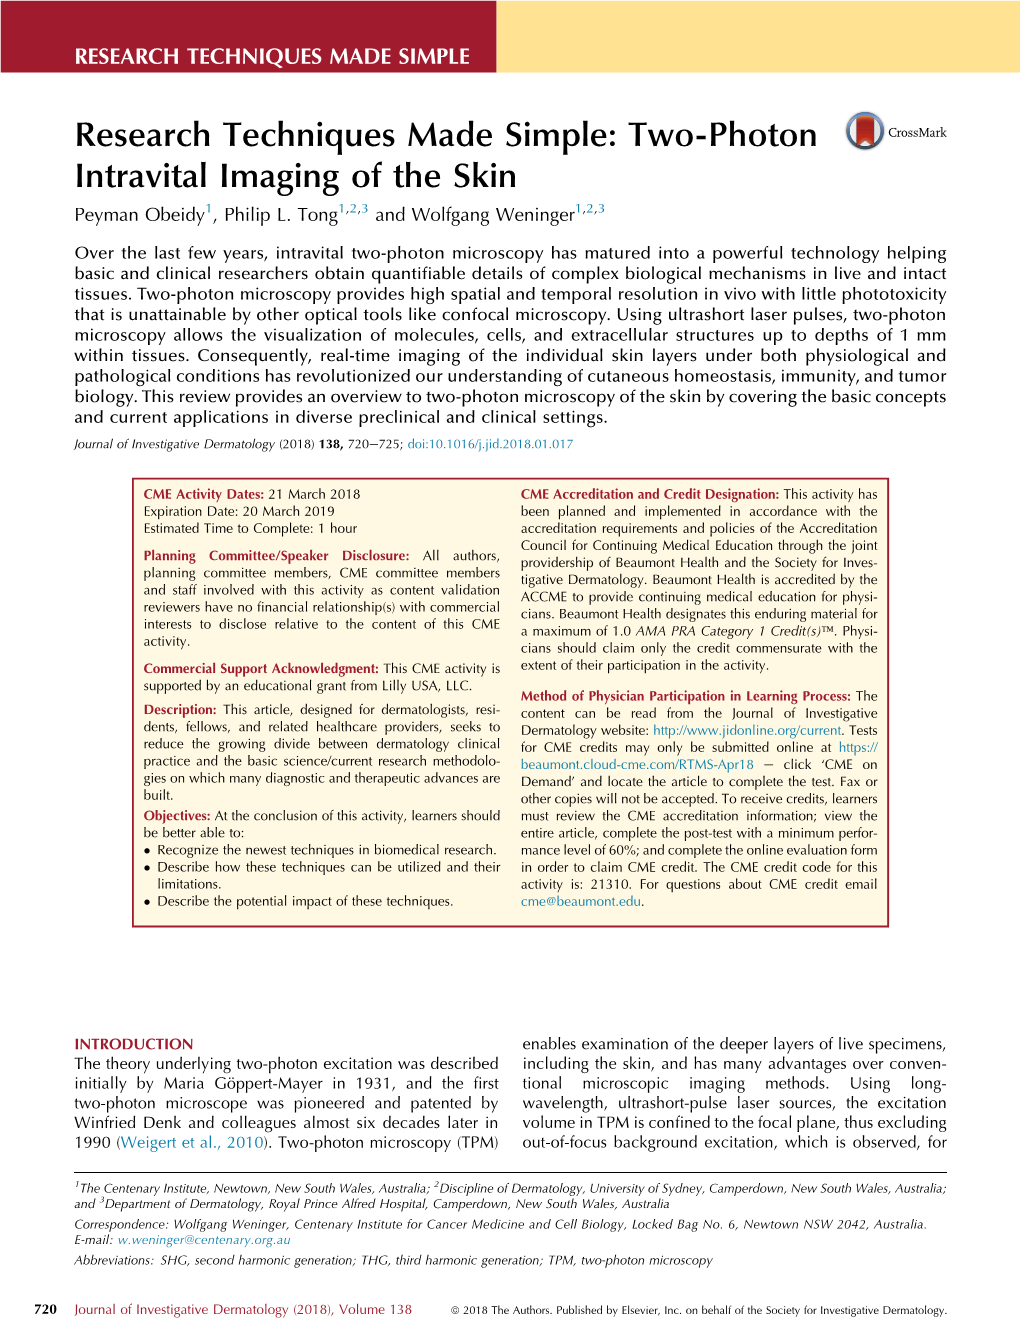 Research Techniques Made Simple: Two-Photon Intravital Imaging of the Skin Peyman Obeidy1, Philip L